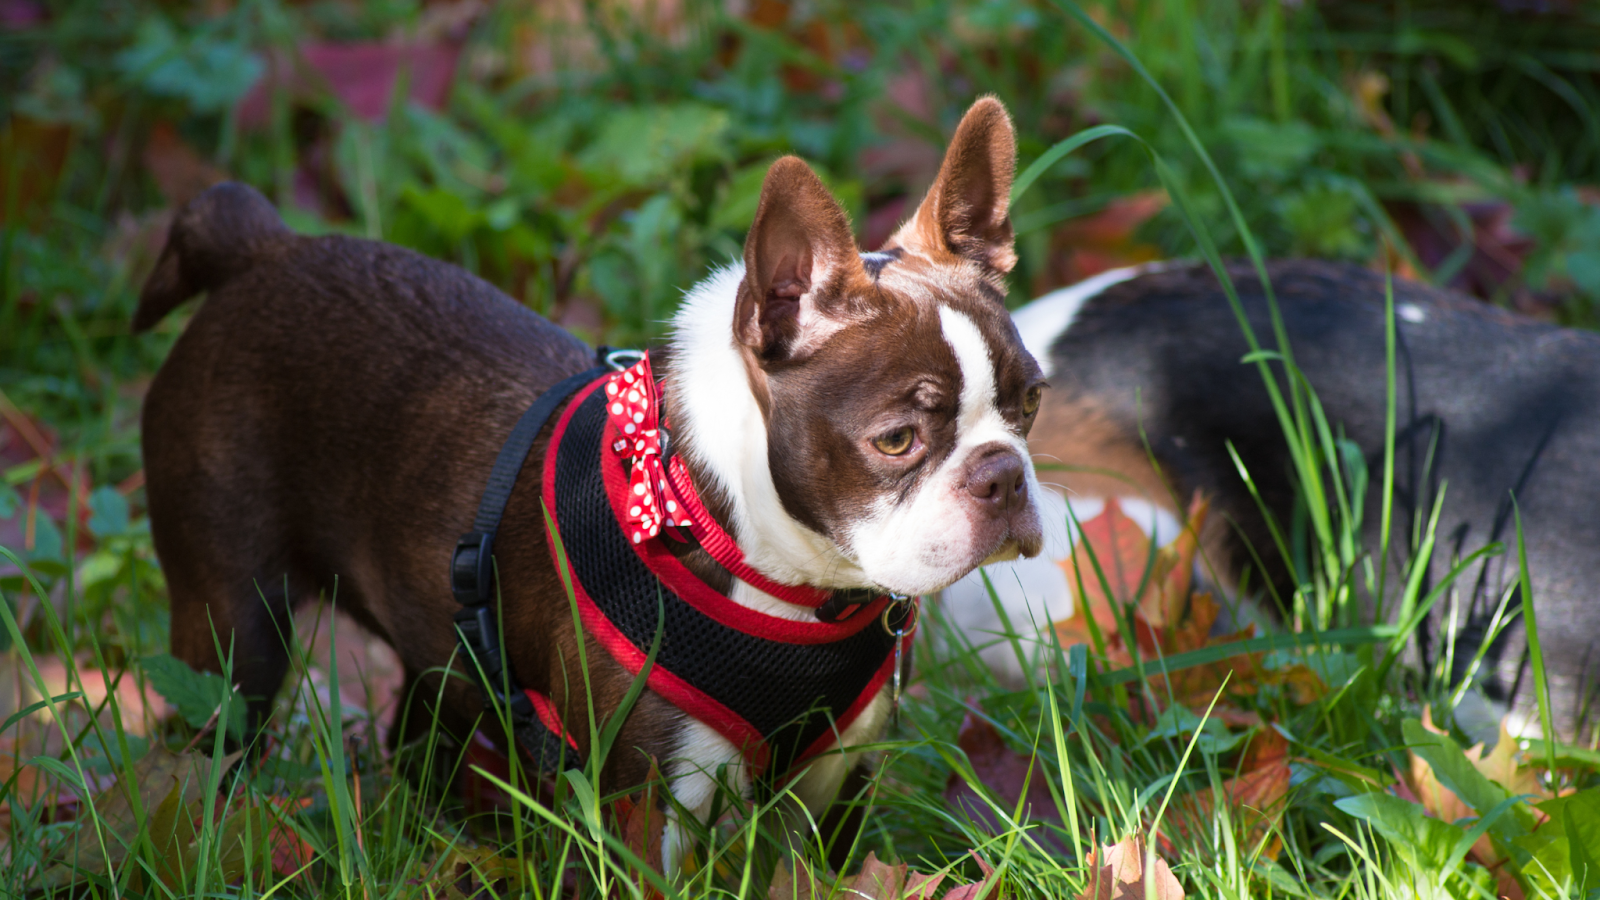 Red and white Boston Terrier in harness